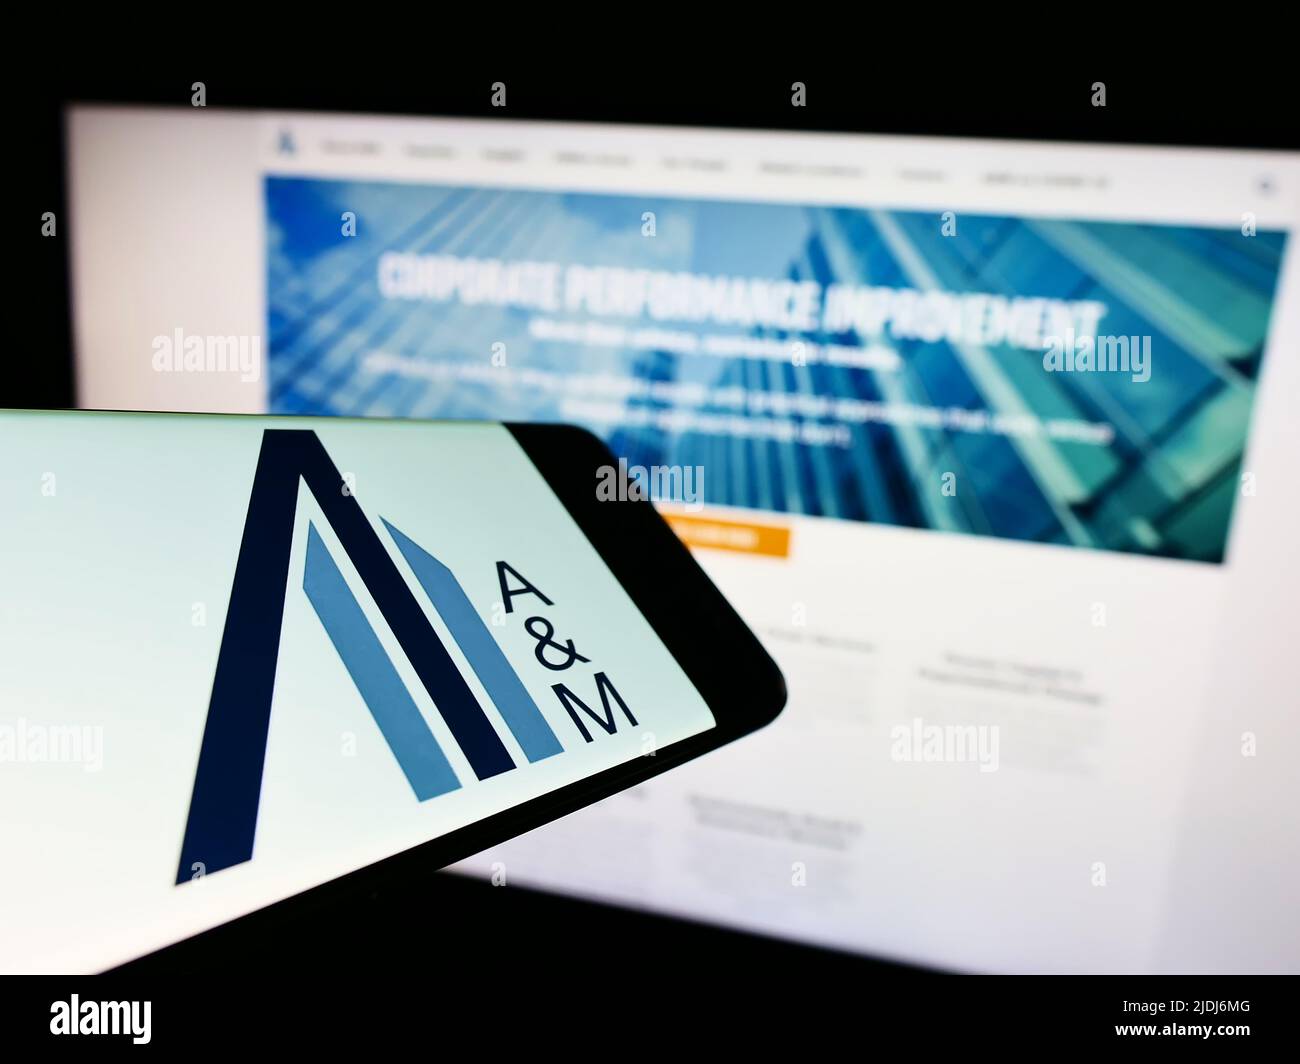 Cellphone with logo of American consulting company Alvarez and Marsal LLC on screen in front of website. Focus on center-right of phone display. Stock Photo